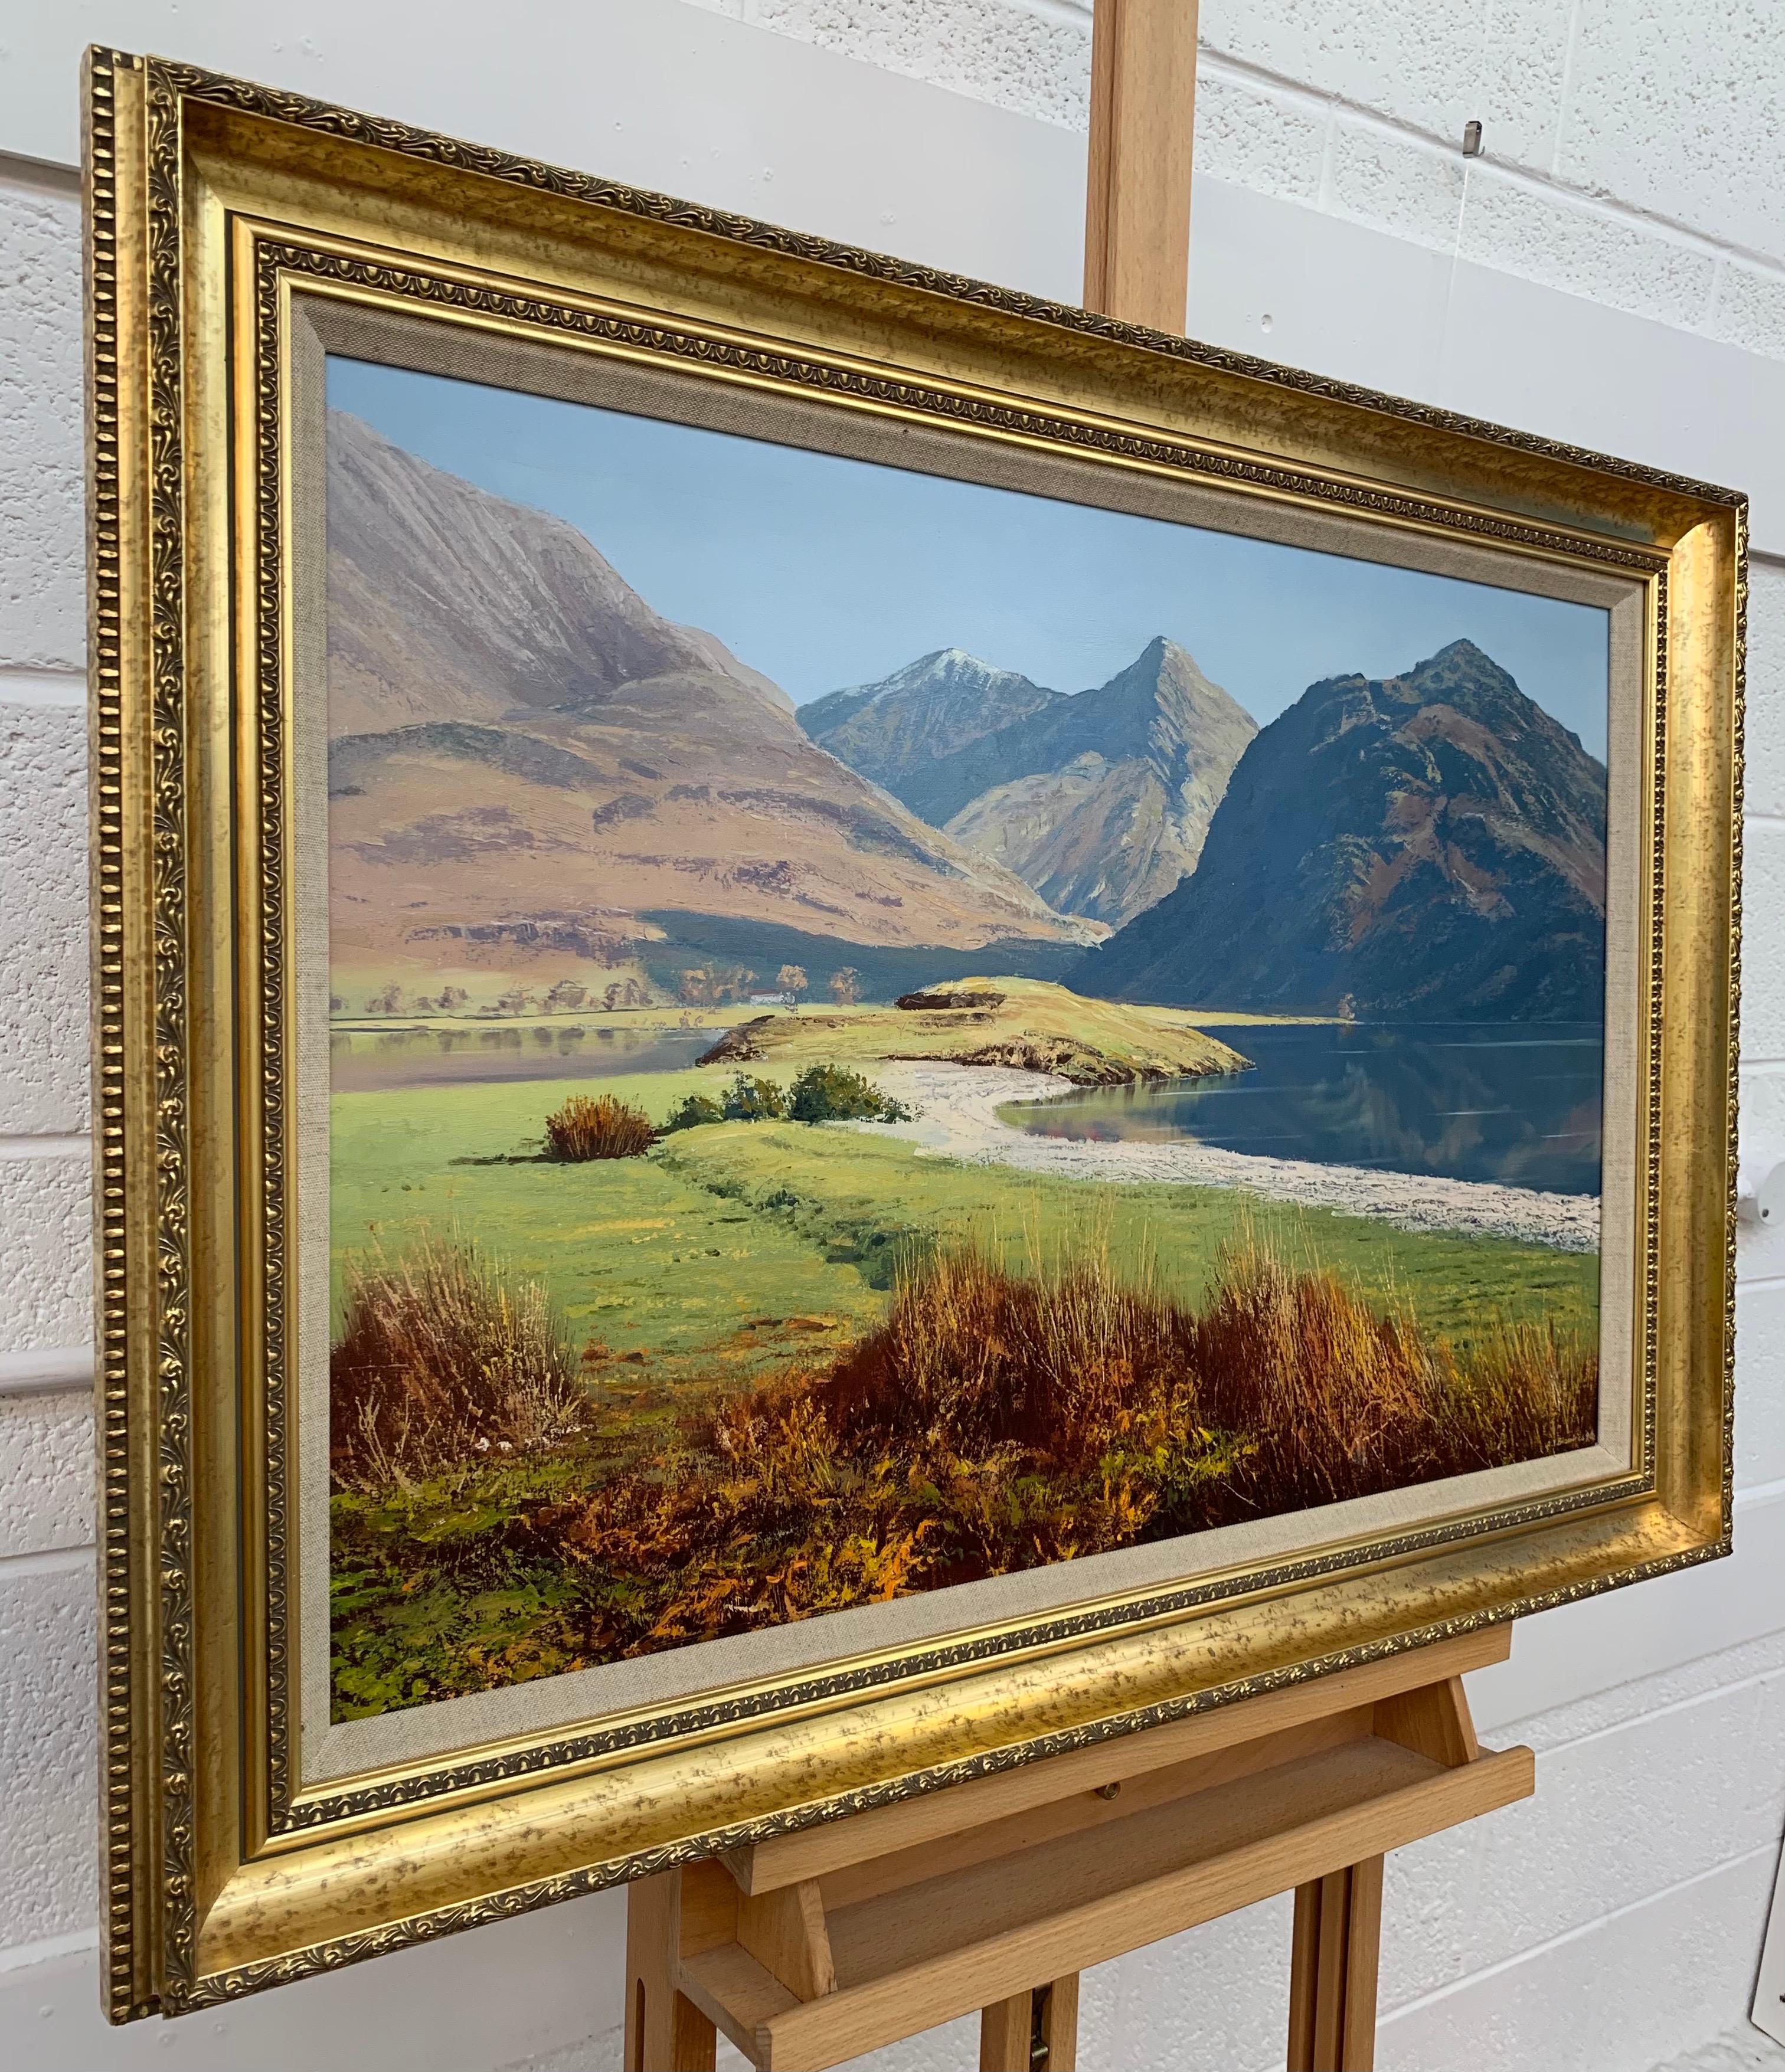 Crummock Water in the English Lake District by Modern British Landscape Artist - Painting by Arthur Terry Blamires